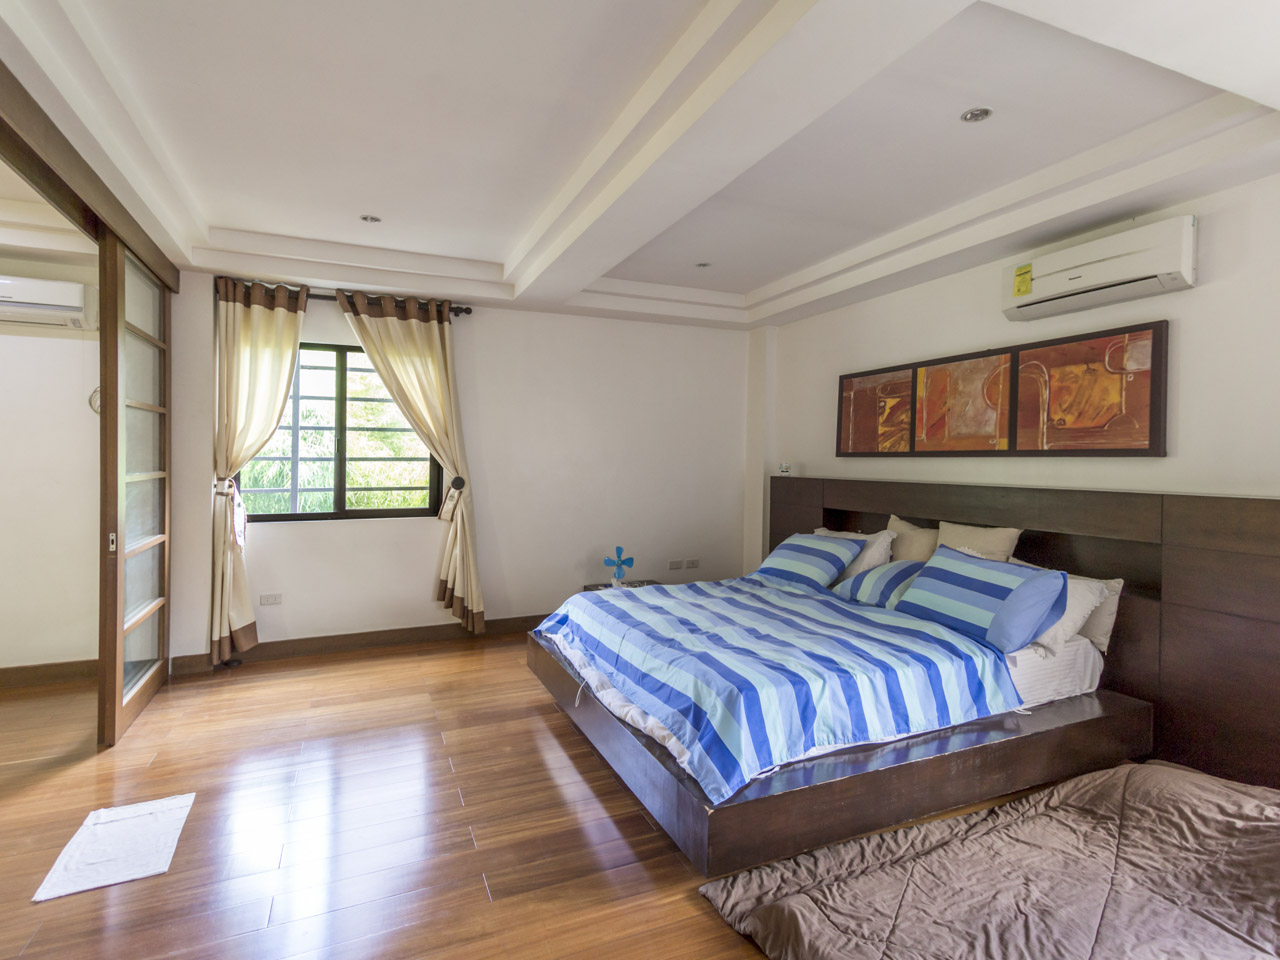 SRB119 Spacious 5 Bedroom House for Sale in Maria Luisa Park Ceb